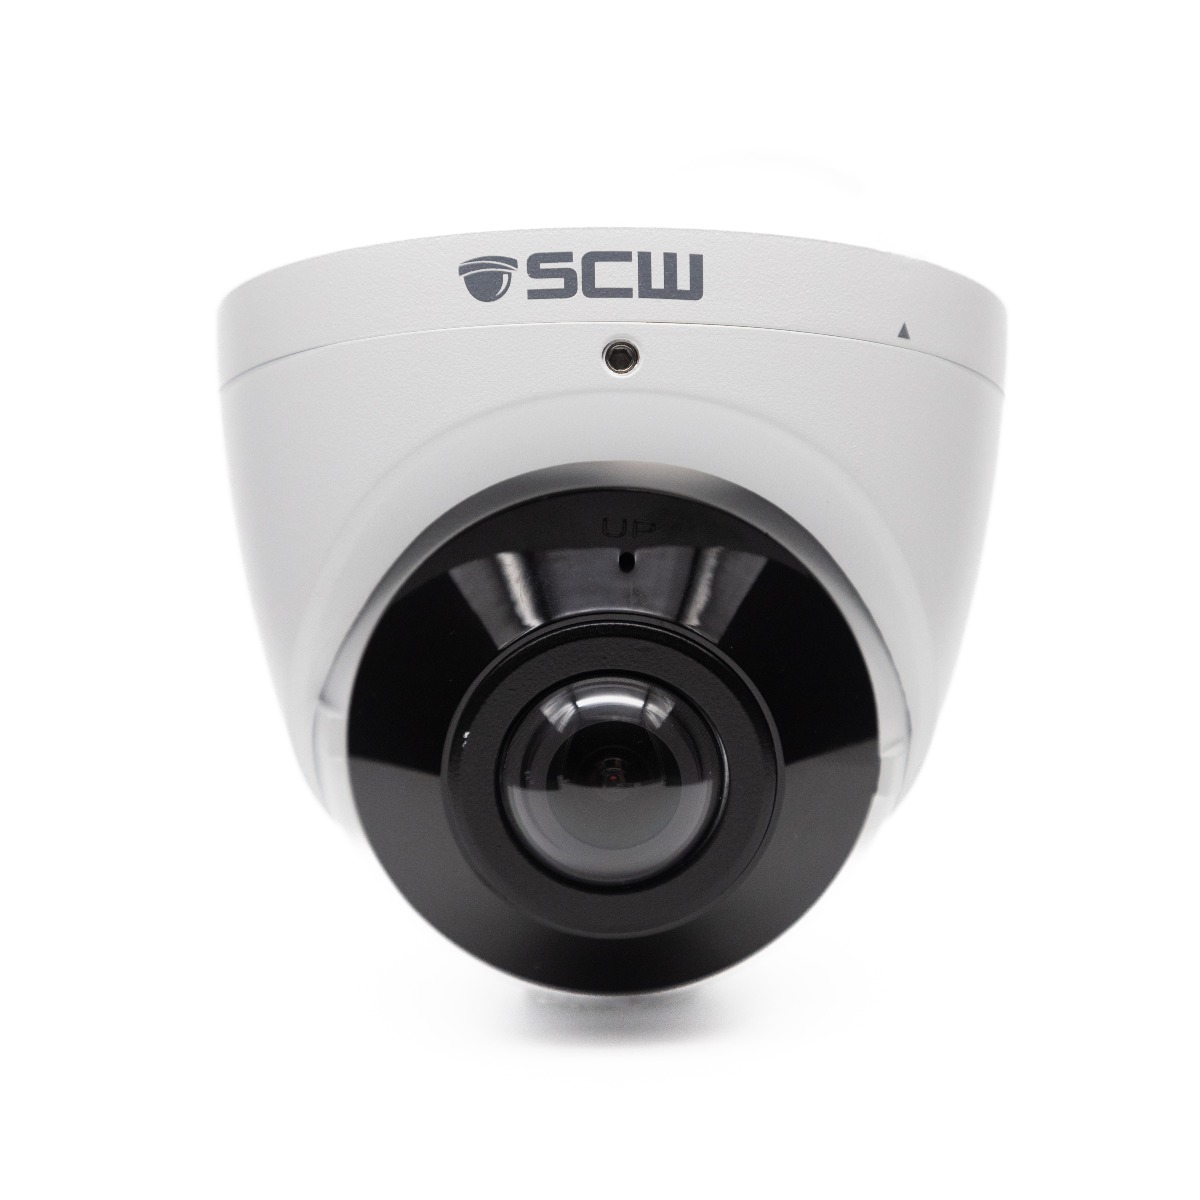 The Scout 5.0 180° Ultra Wide Angle Turret Camera